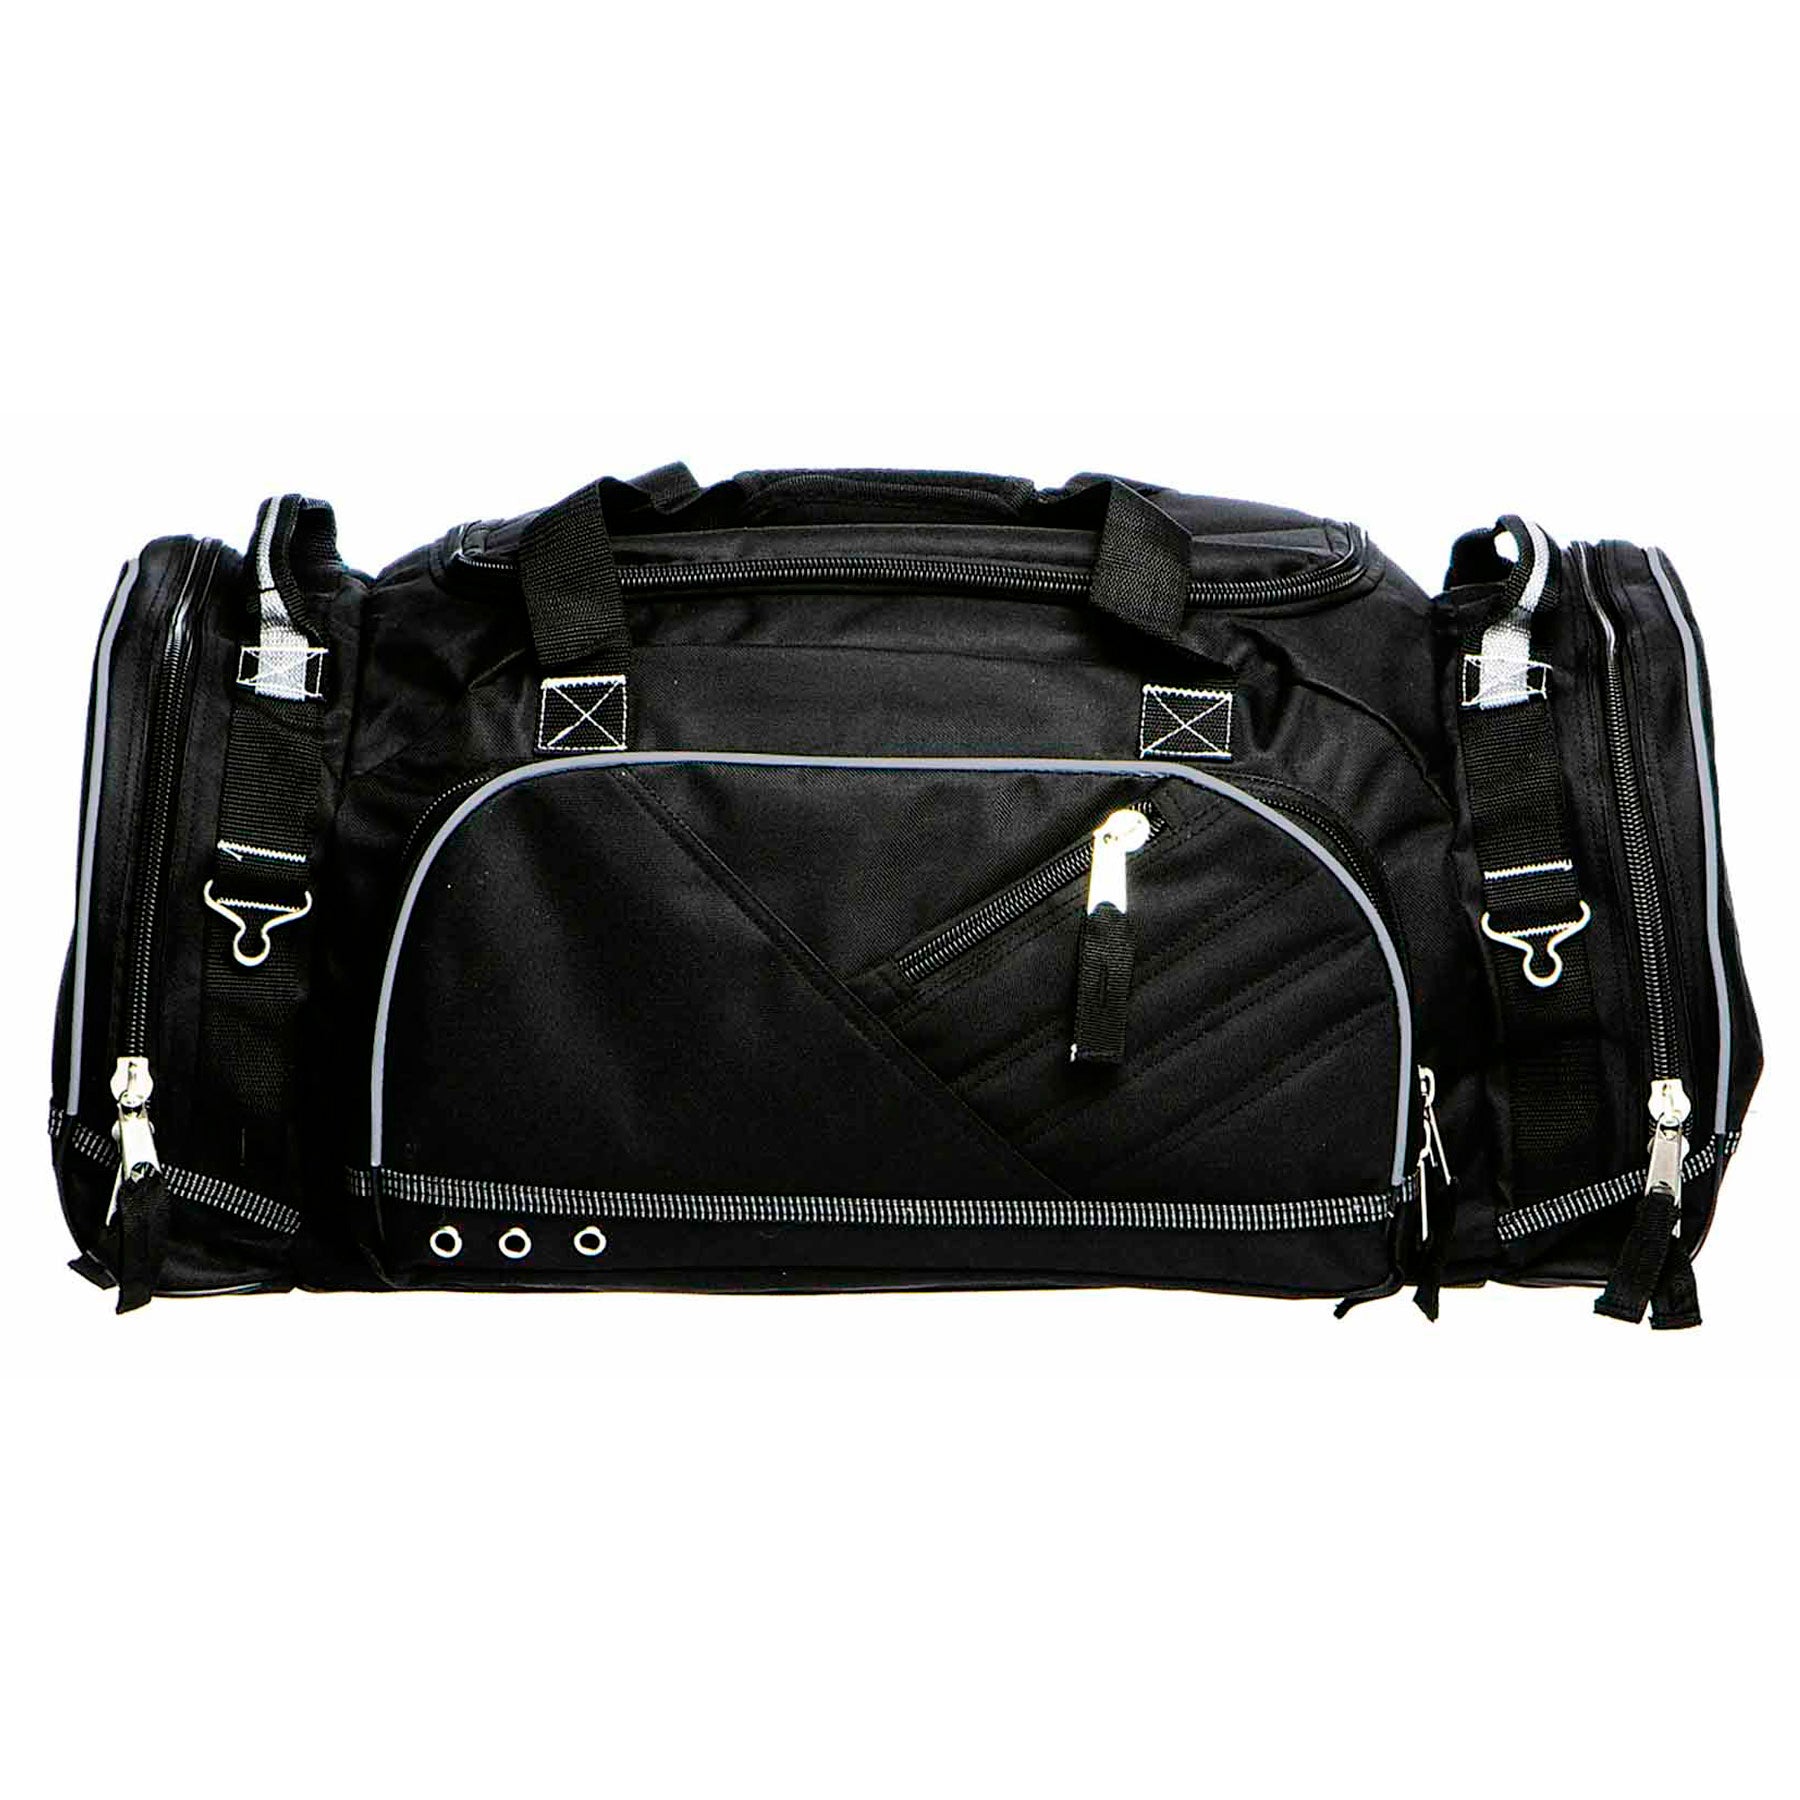 House of Uniforms The Recon Sports Duffle Bag Gear for Life Black